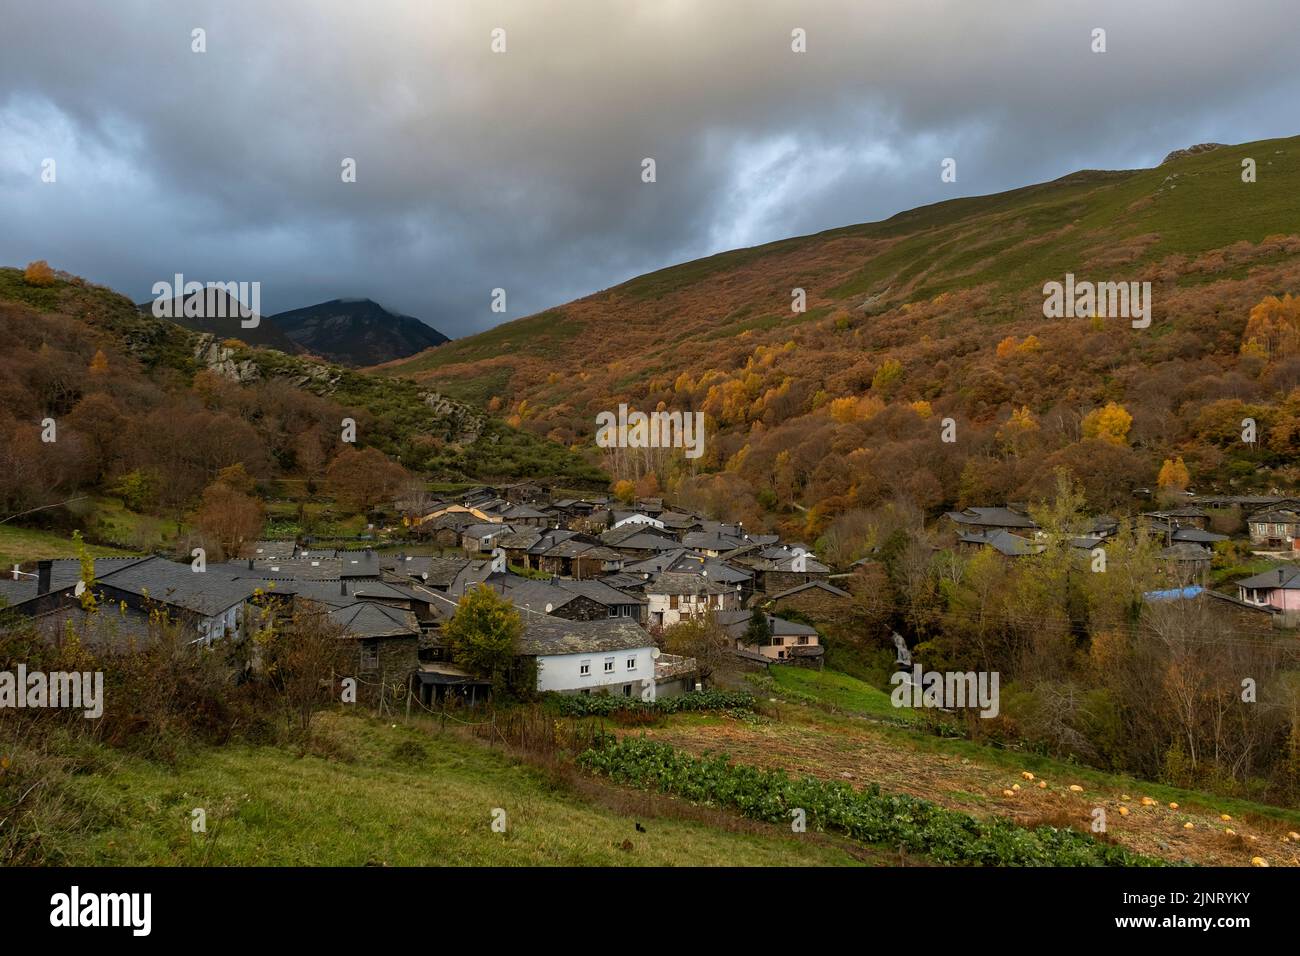 Small village of A Seara in the mountains of Serra do Courel, Galicia, Spain. Autumnal landscape Stock Photo